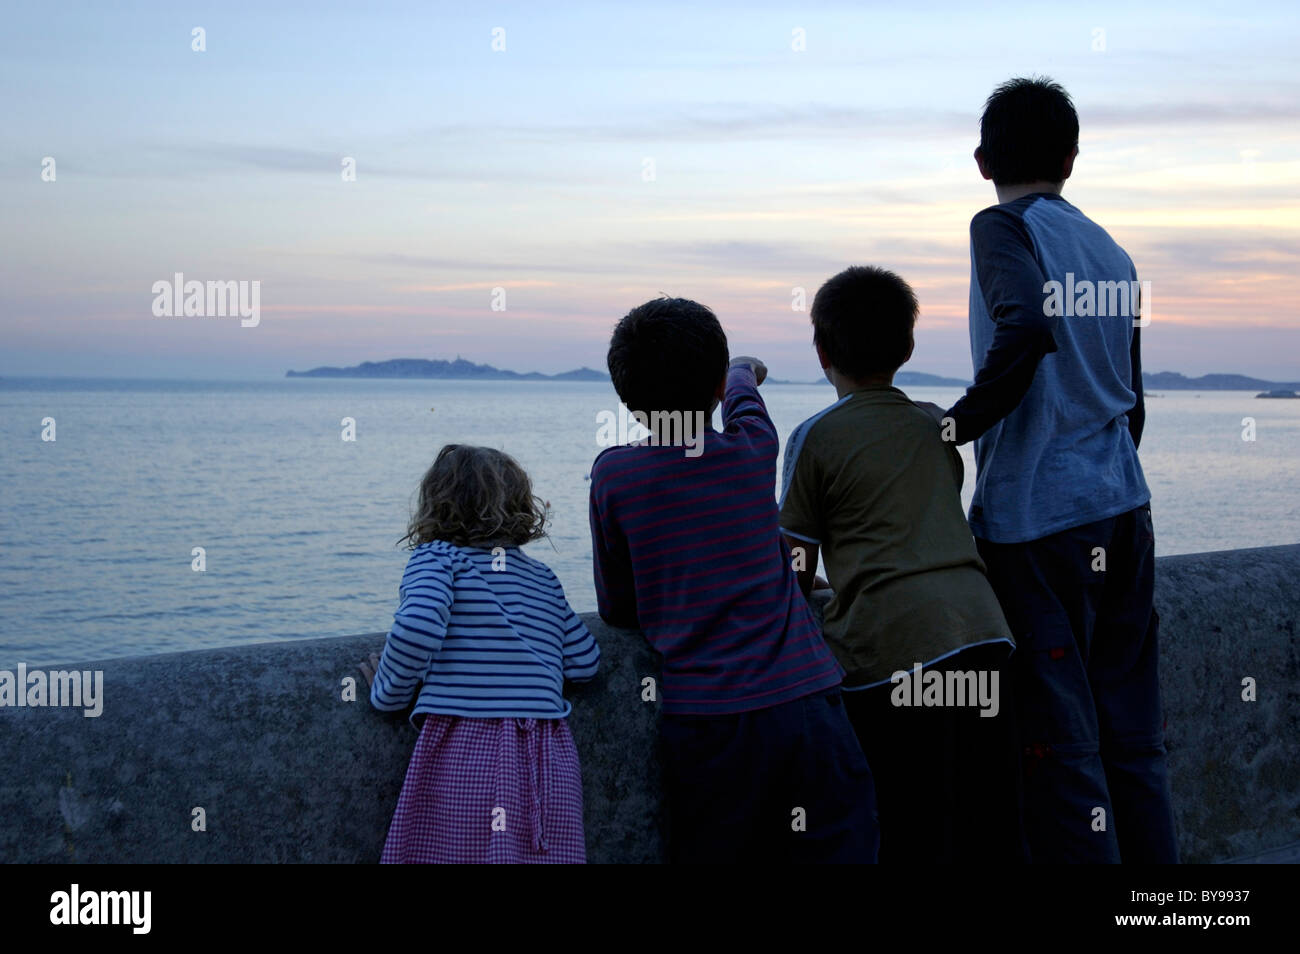 Four children watching the sunset over the Frioul archipelago, Marseille, France. Stock Photo